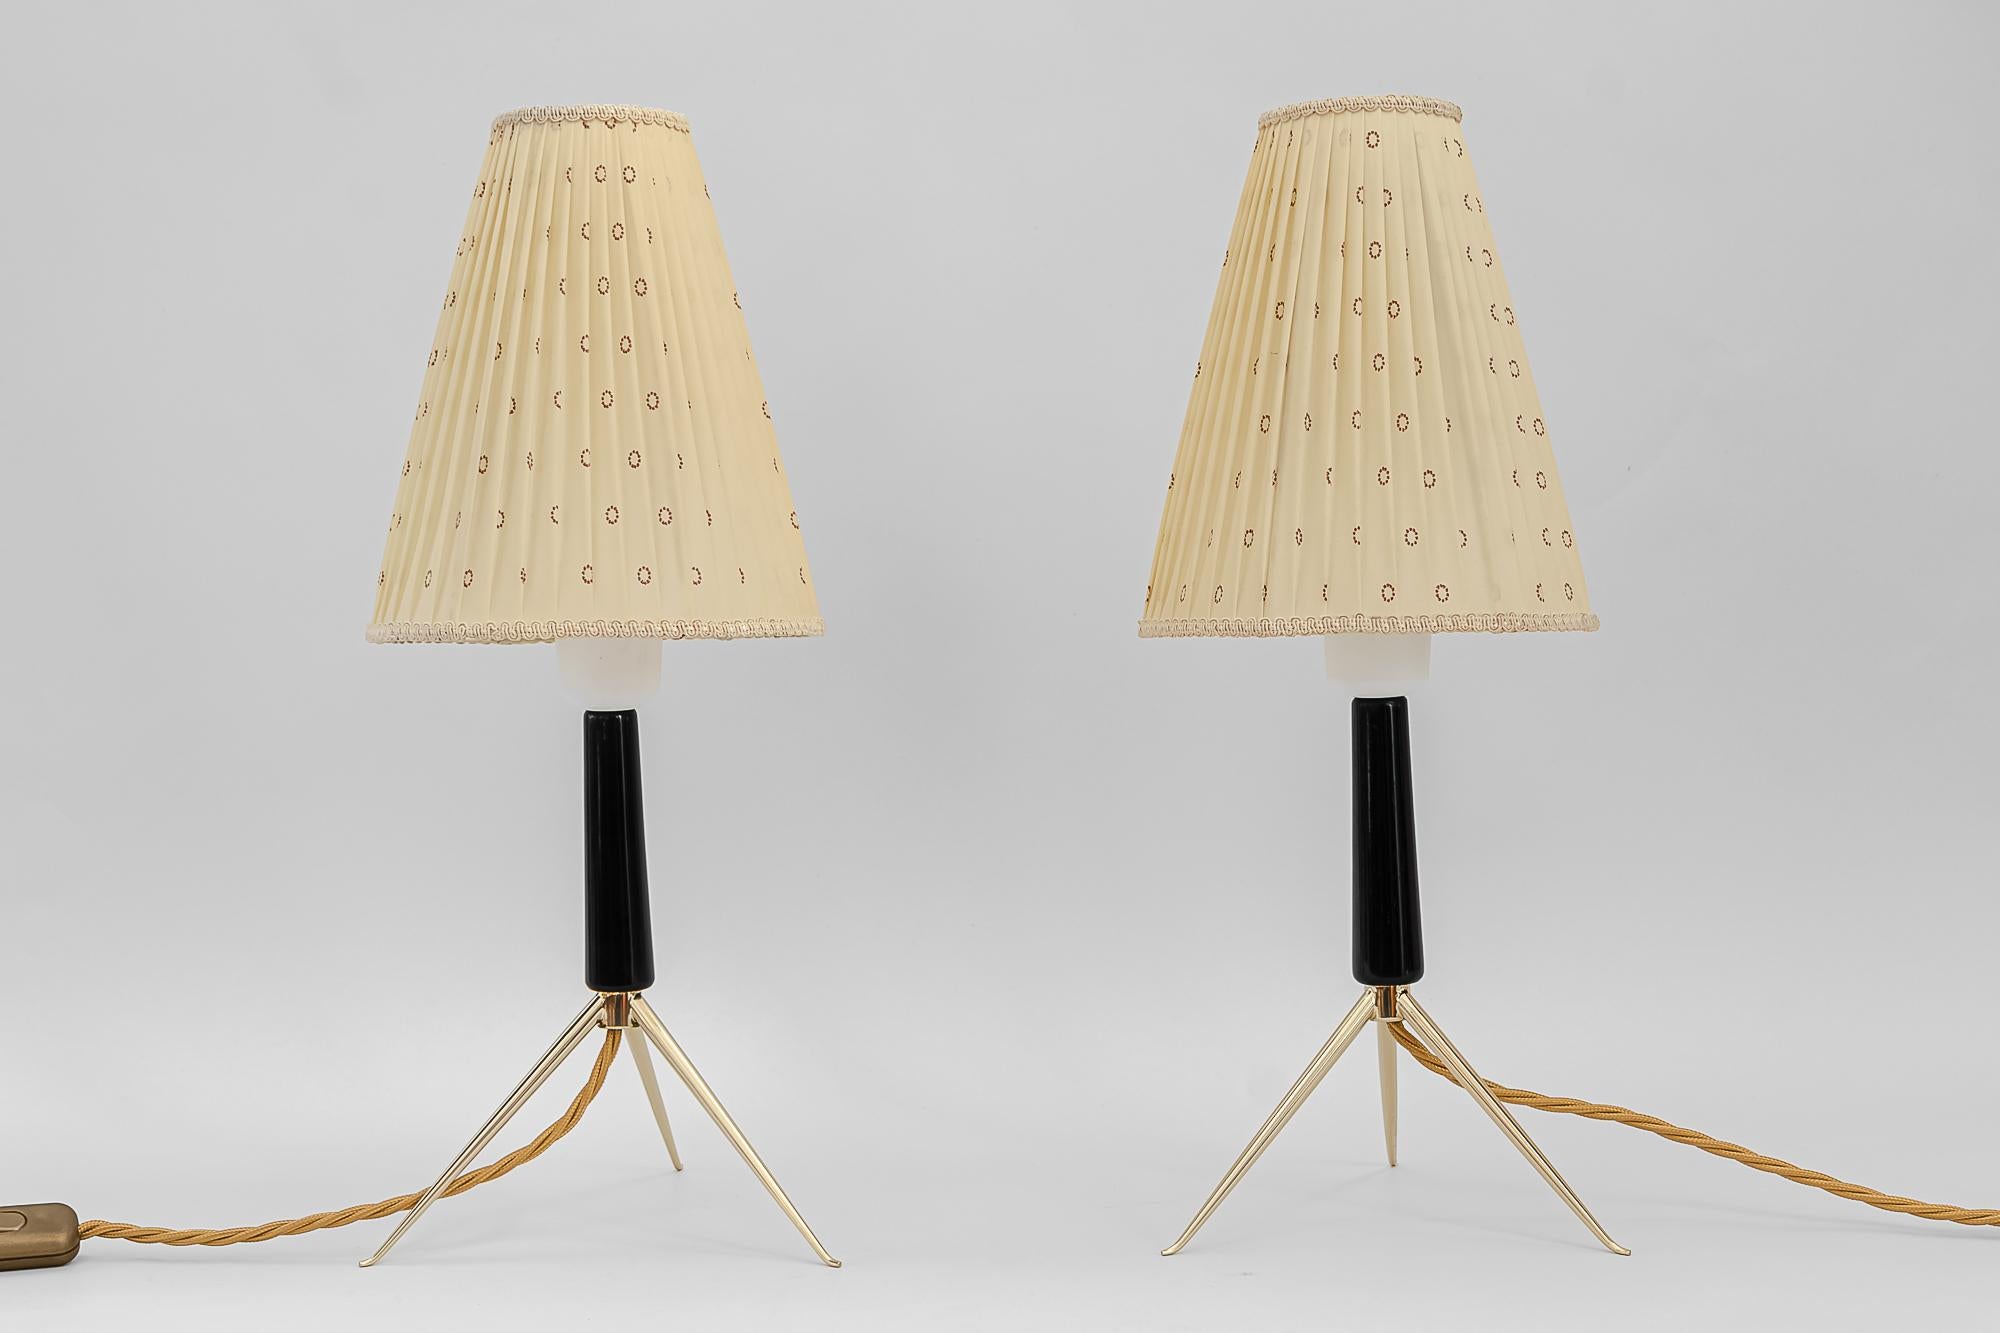 Two Rupert Nikoll table lamps, Vienna, circa 1950s
Polished and stove enamelled
Wood polished 
The shades are original old.